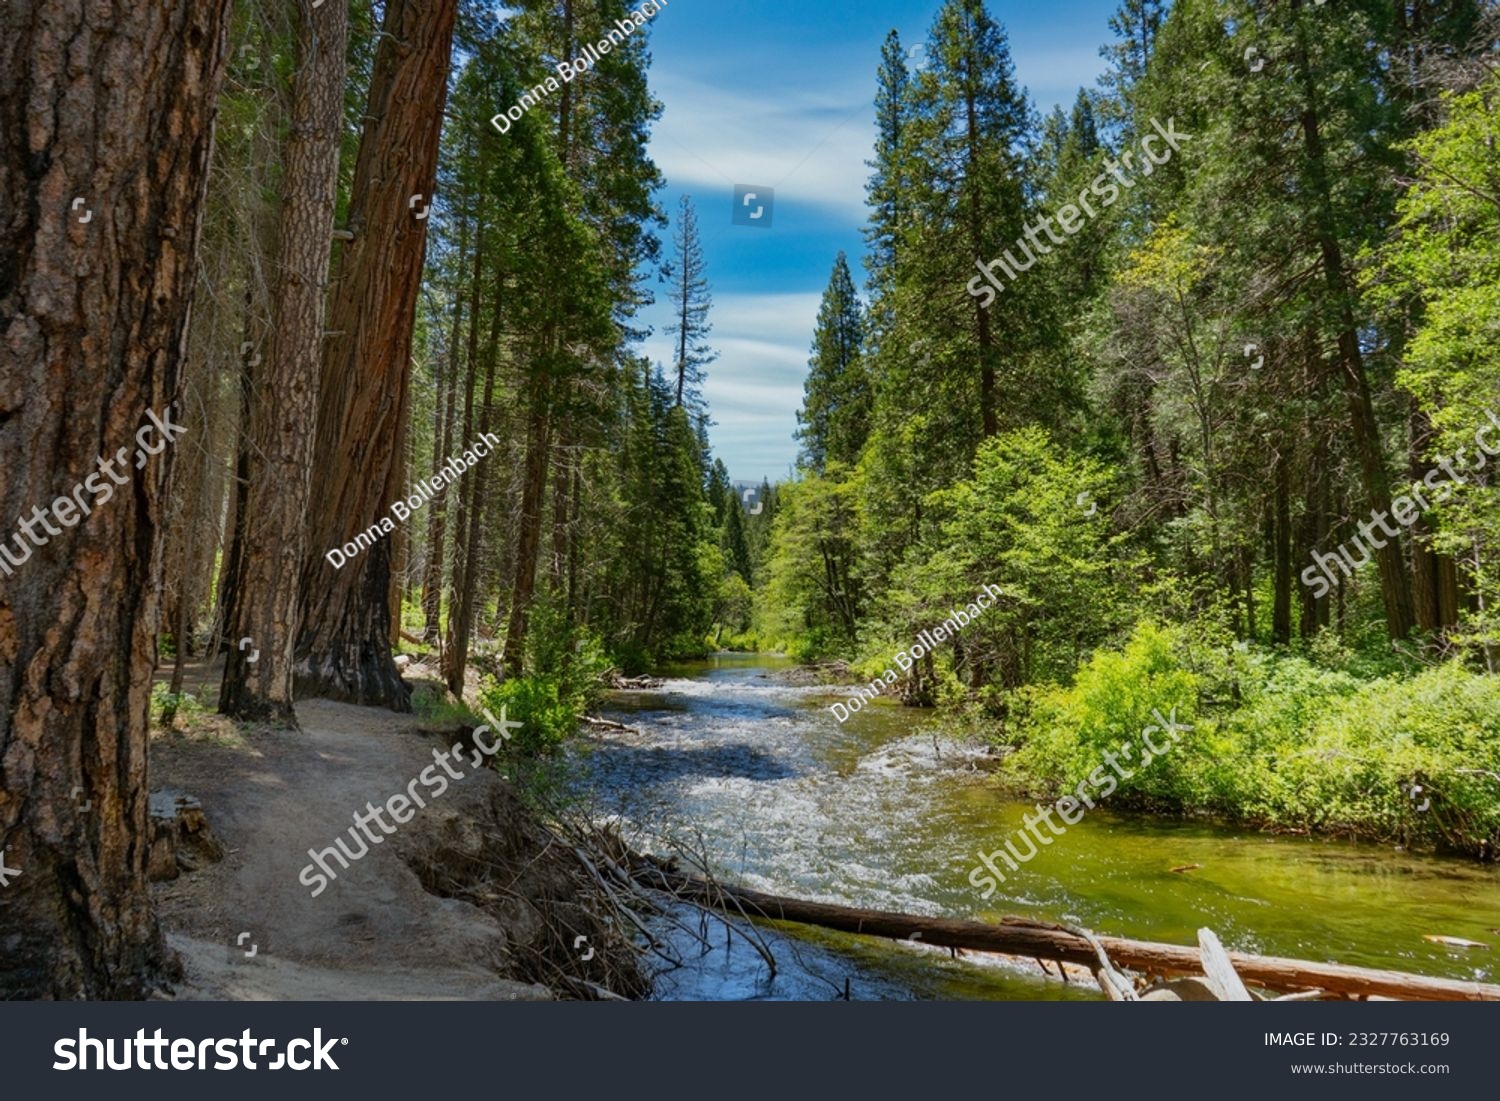 The Carlon Falls Trail in Yosemite National Park winds through an evergreen forest along the Southfork of the Tuolumne River. #2327763169